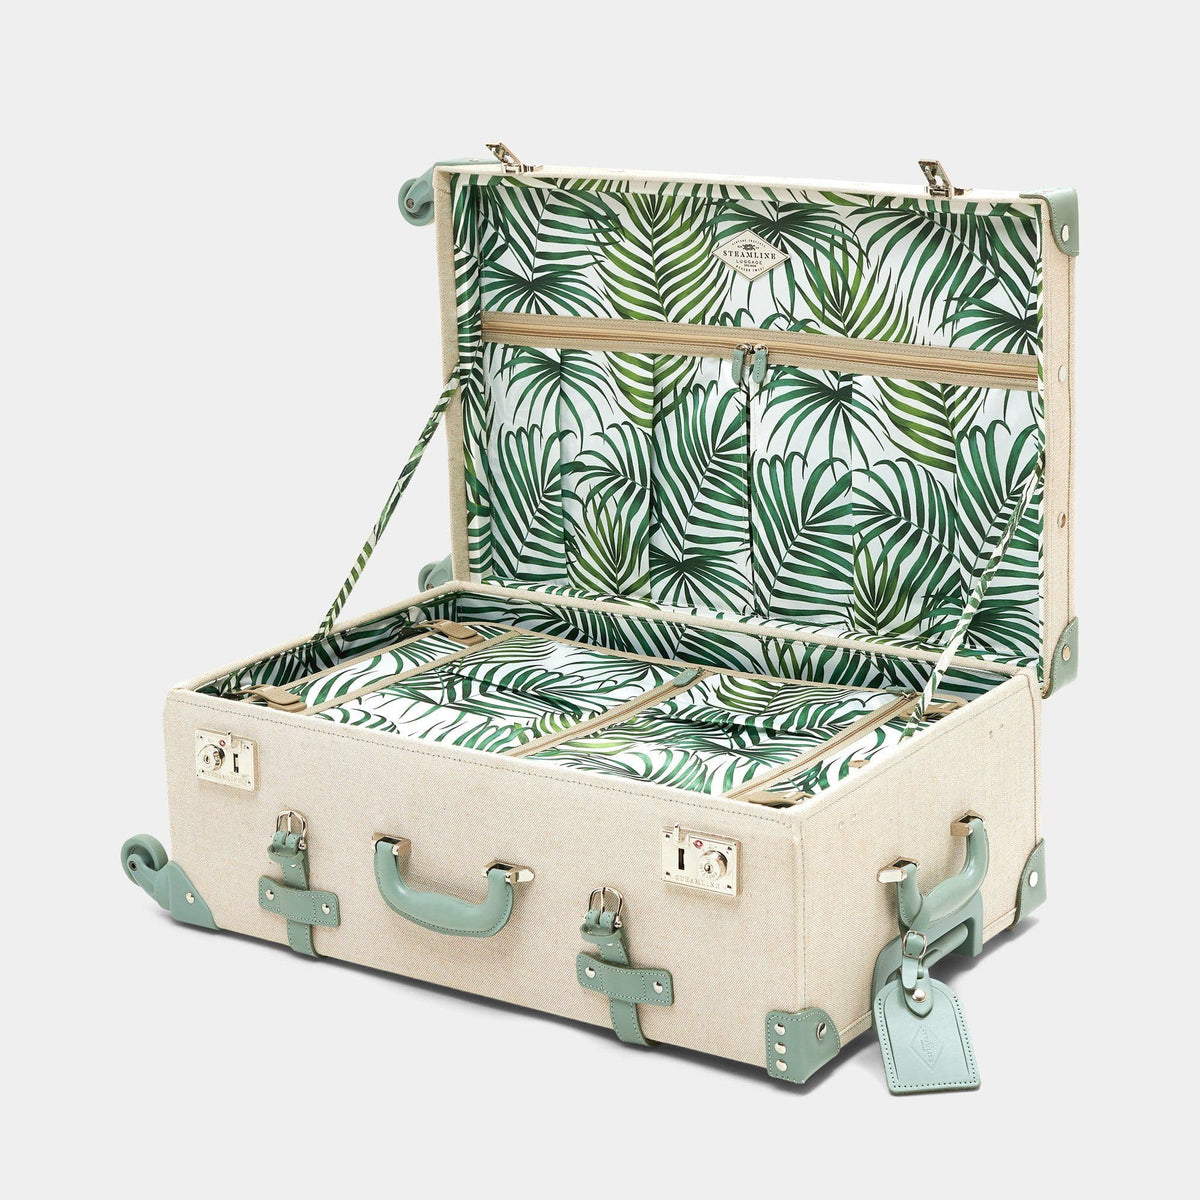 The Editor - Sea Green Check In Spinner Spinner Steamline Luggage 